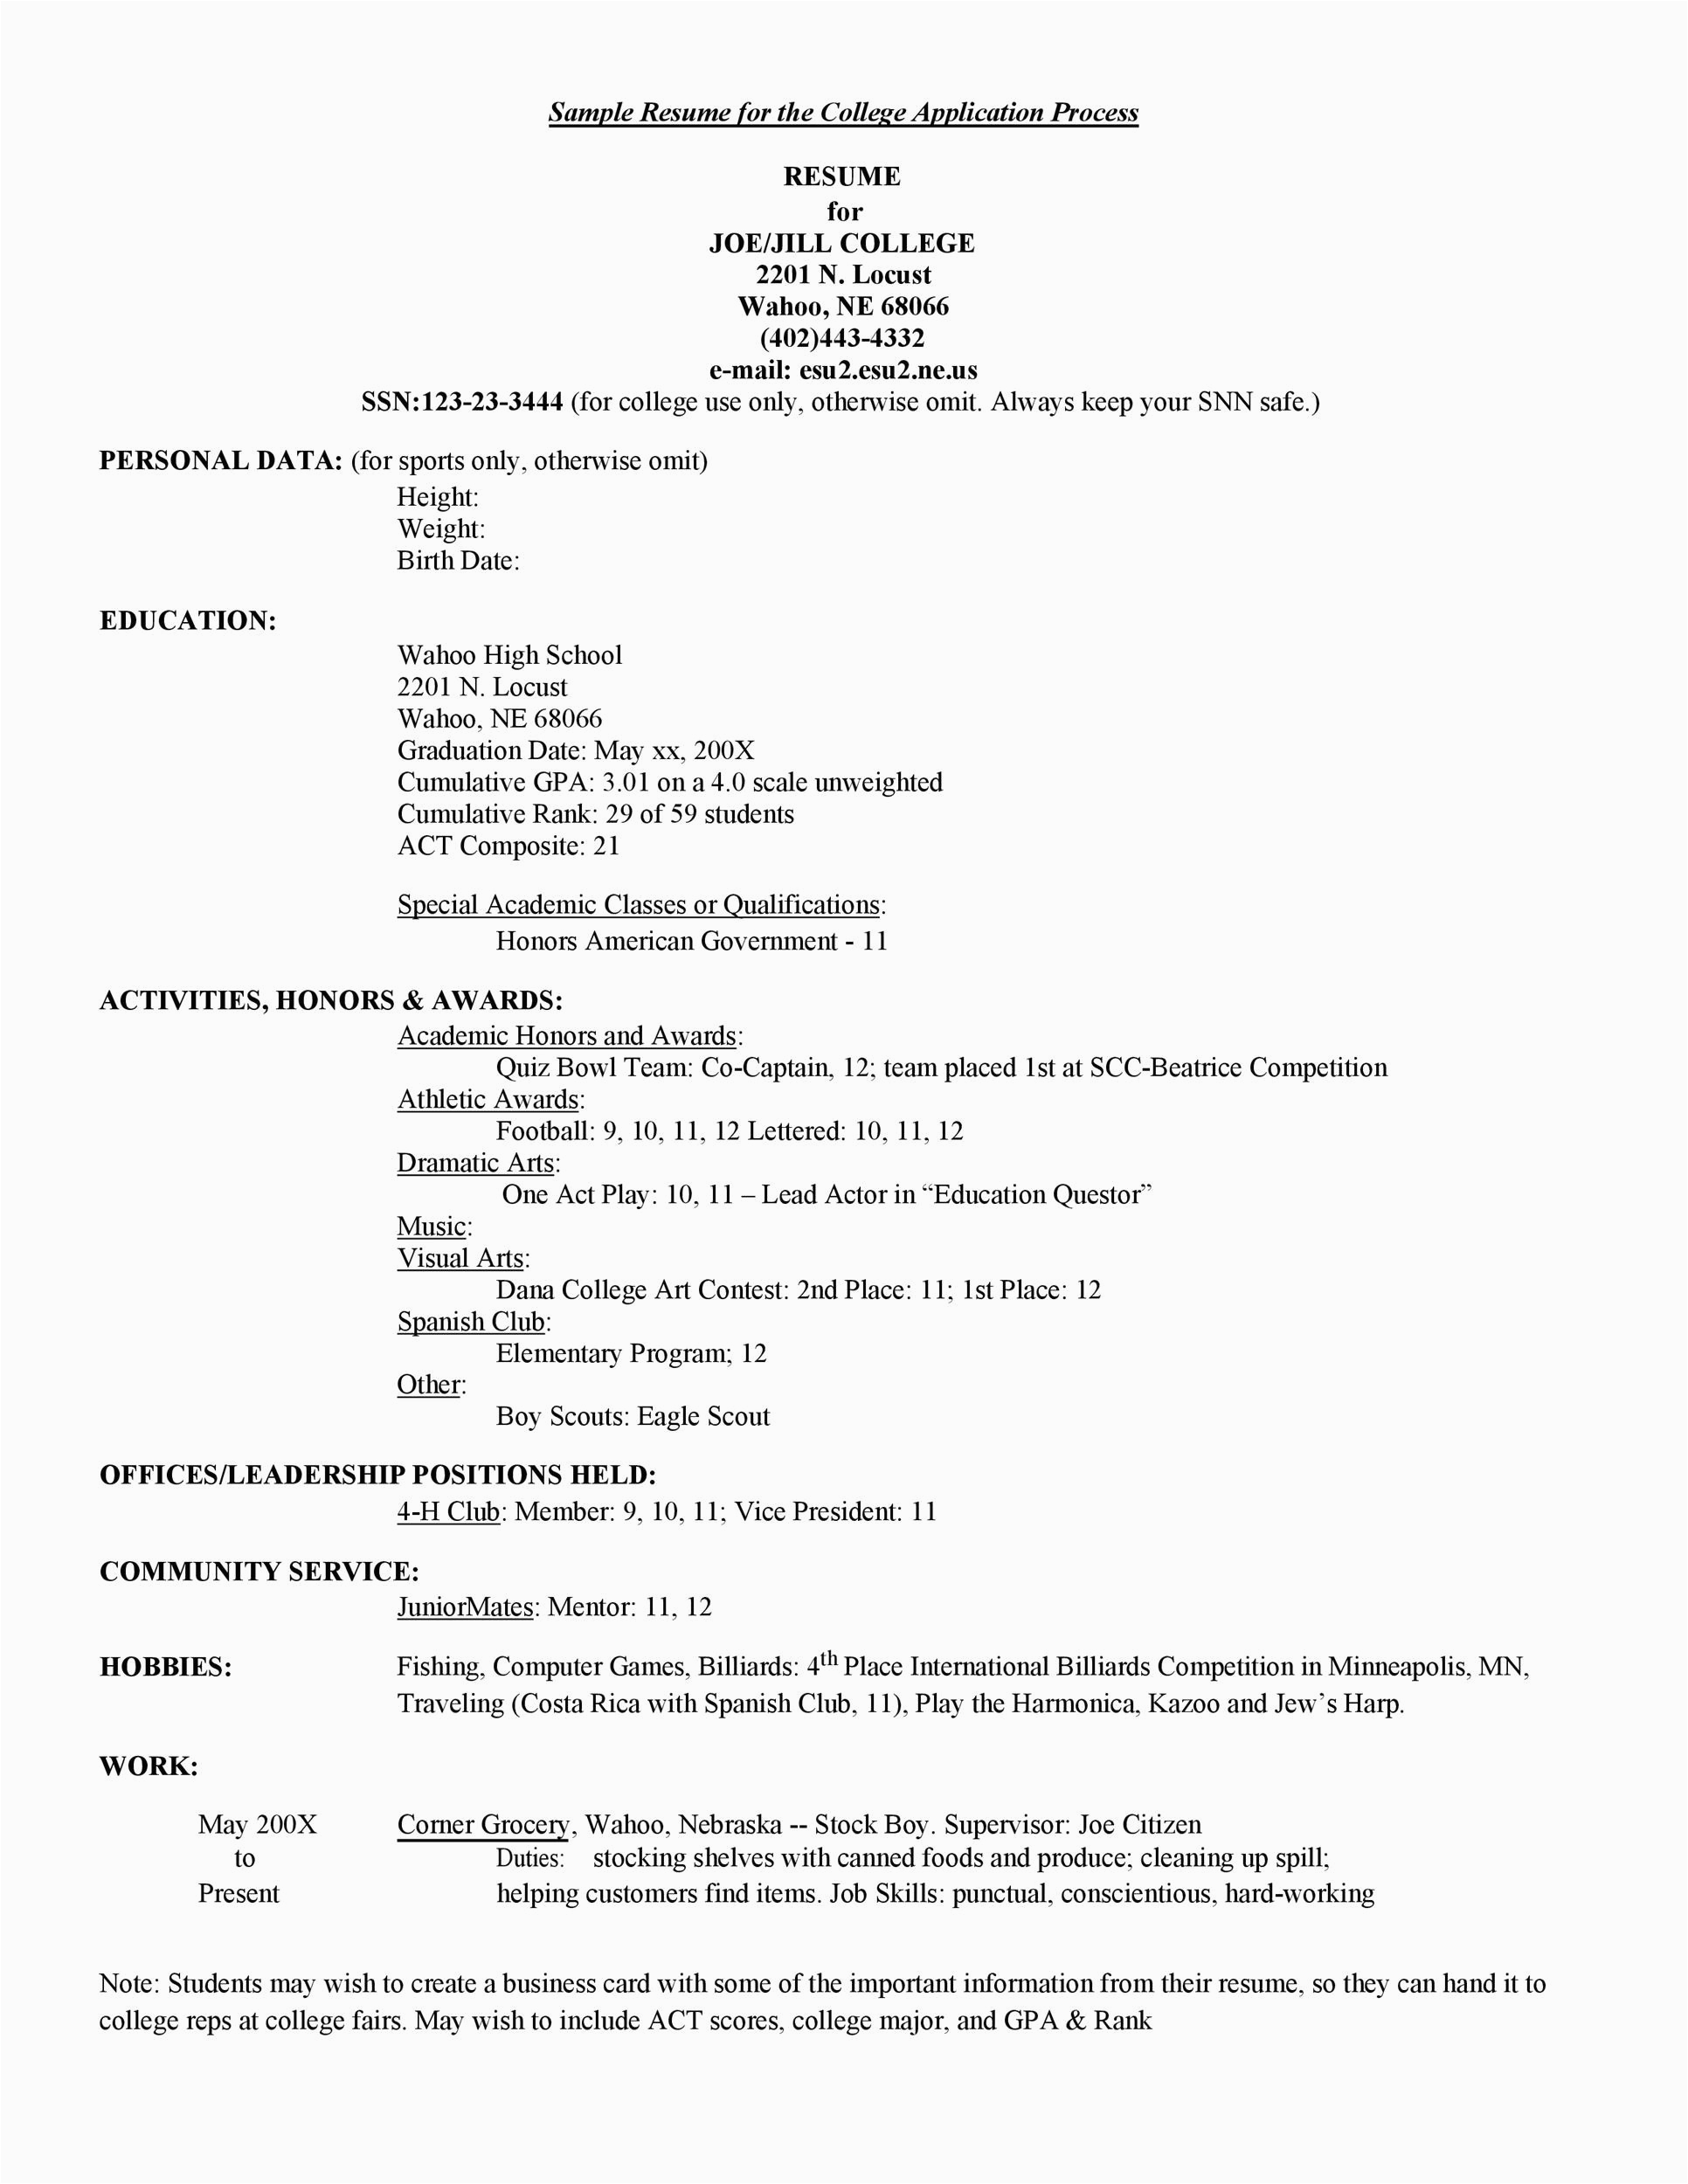 Sample Academic Resume for College Application 50 College Student Resume Templates & format Templatelab